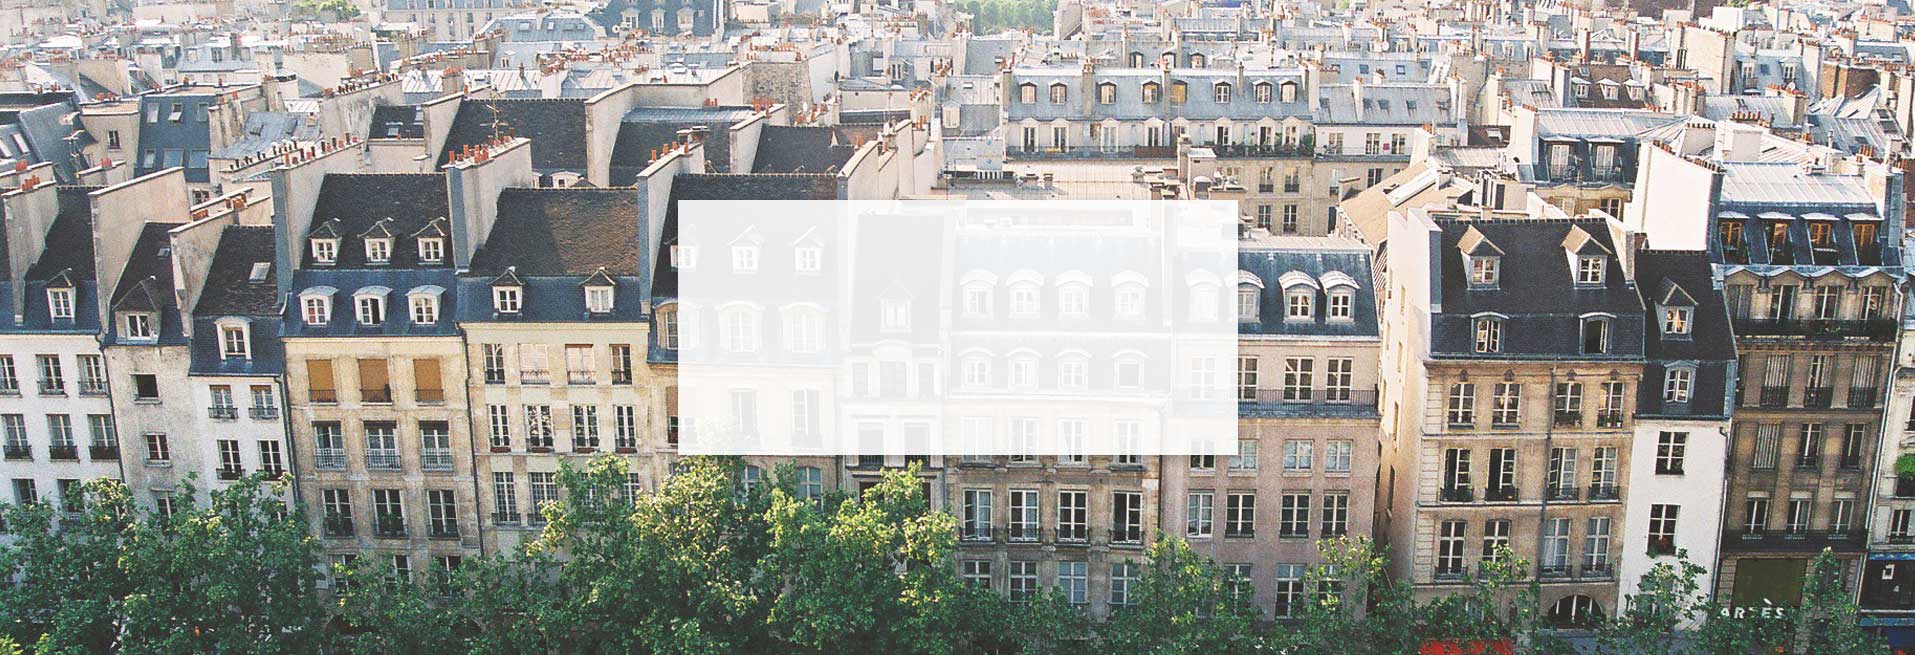 ohrcoinvest-homepage-slider-immobilier